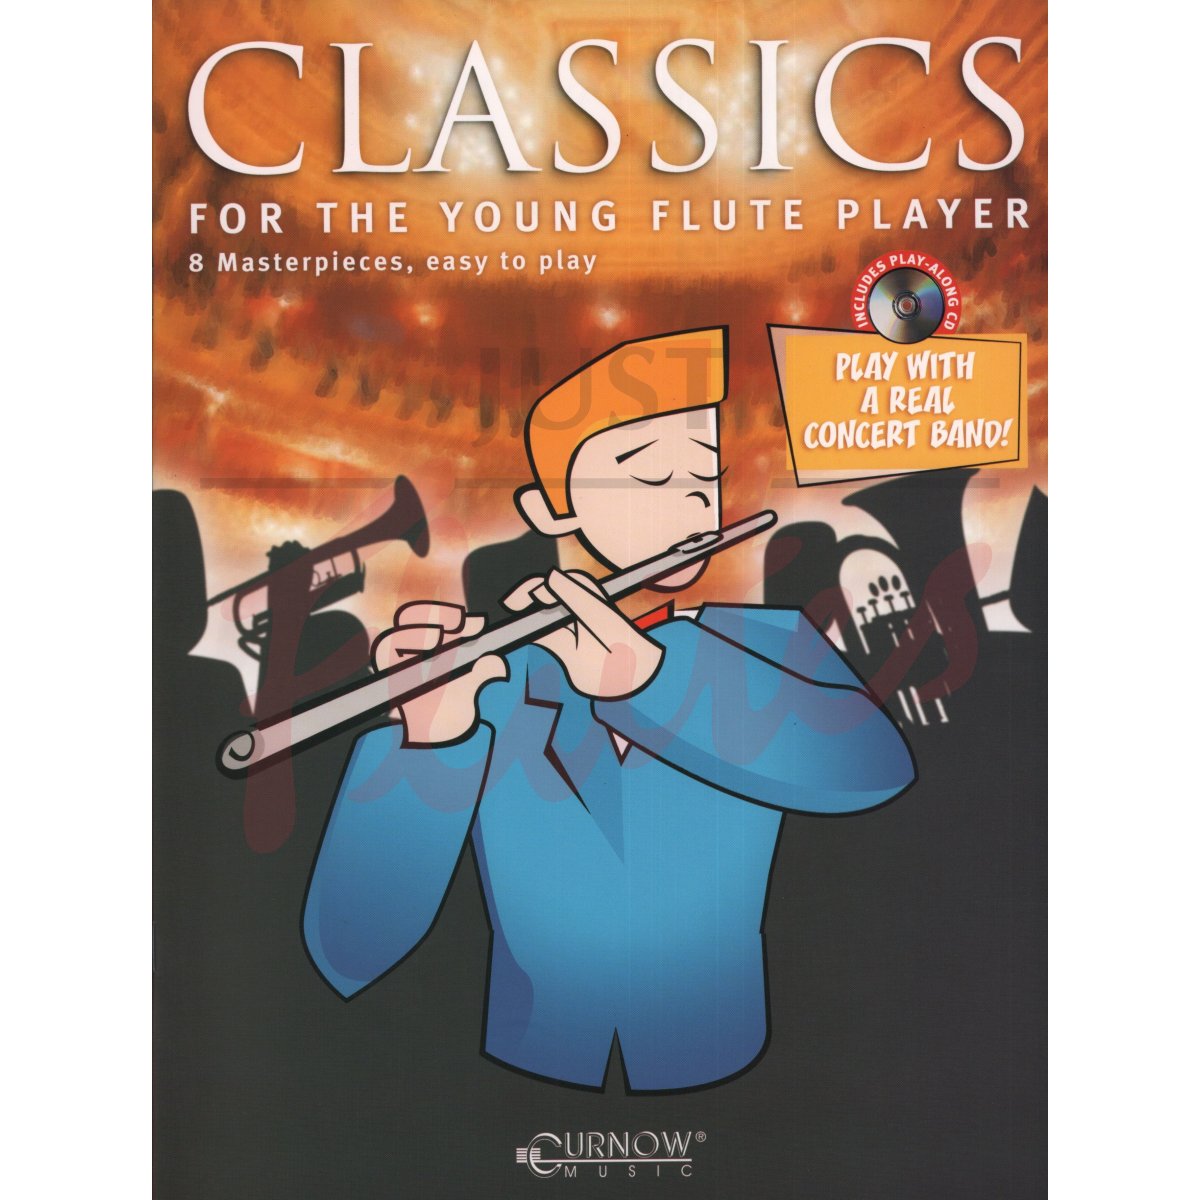 Classics for the Young Flute Player